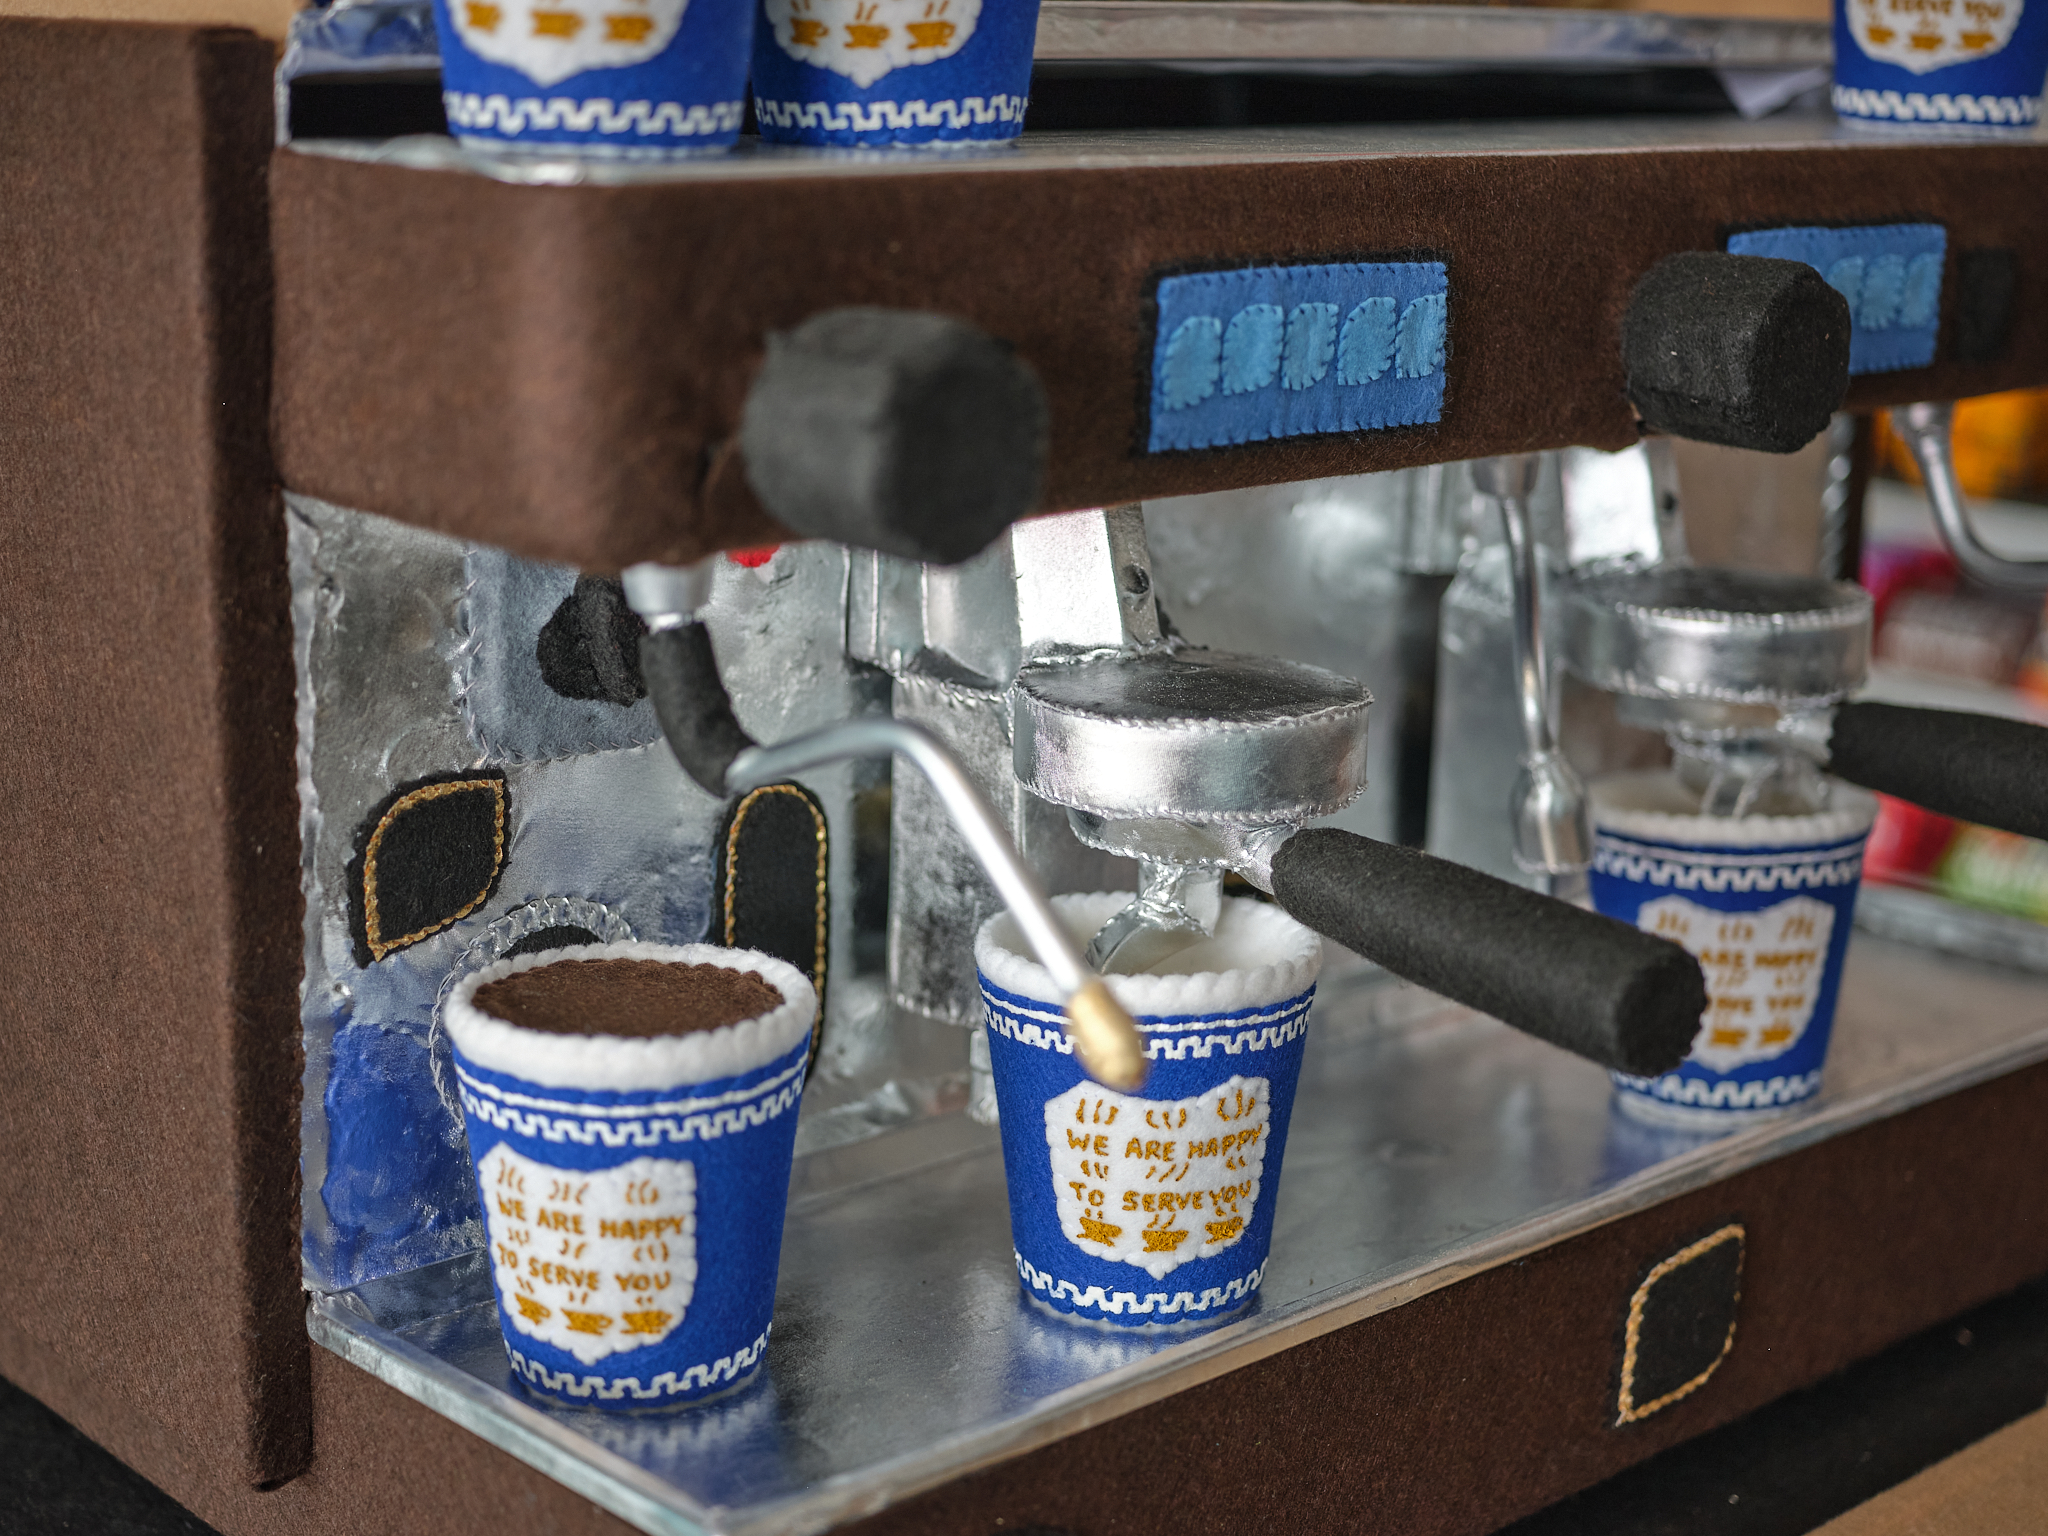 Coffee cups made of felt stand on a fake espresso machine.